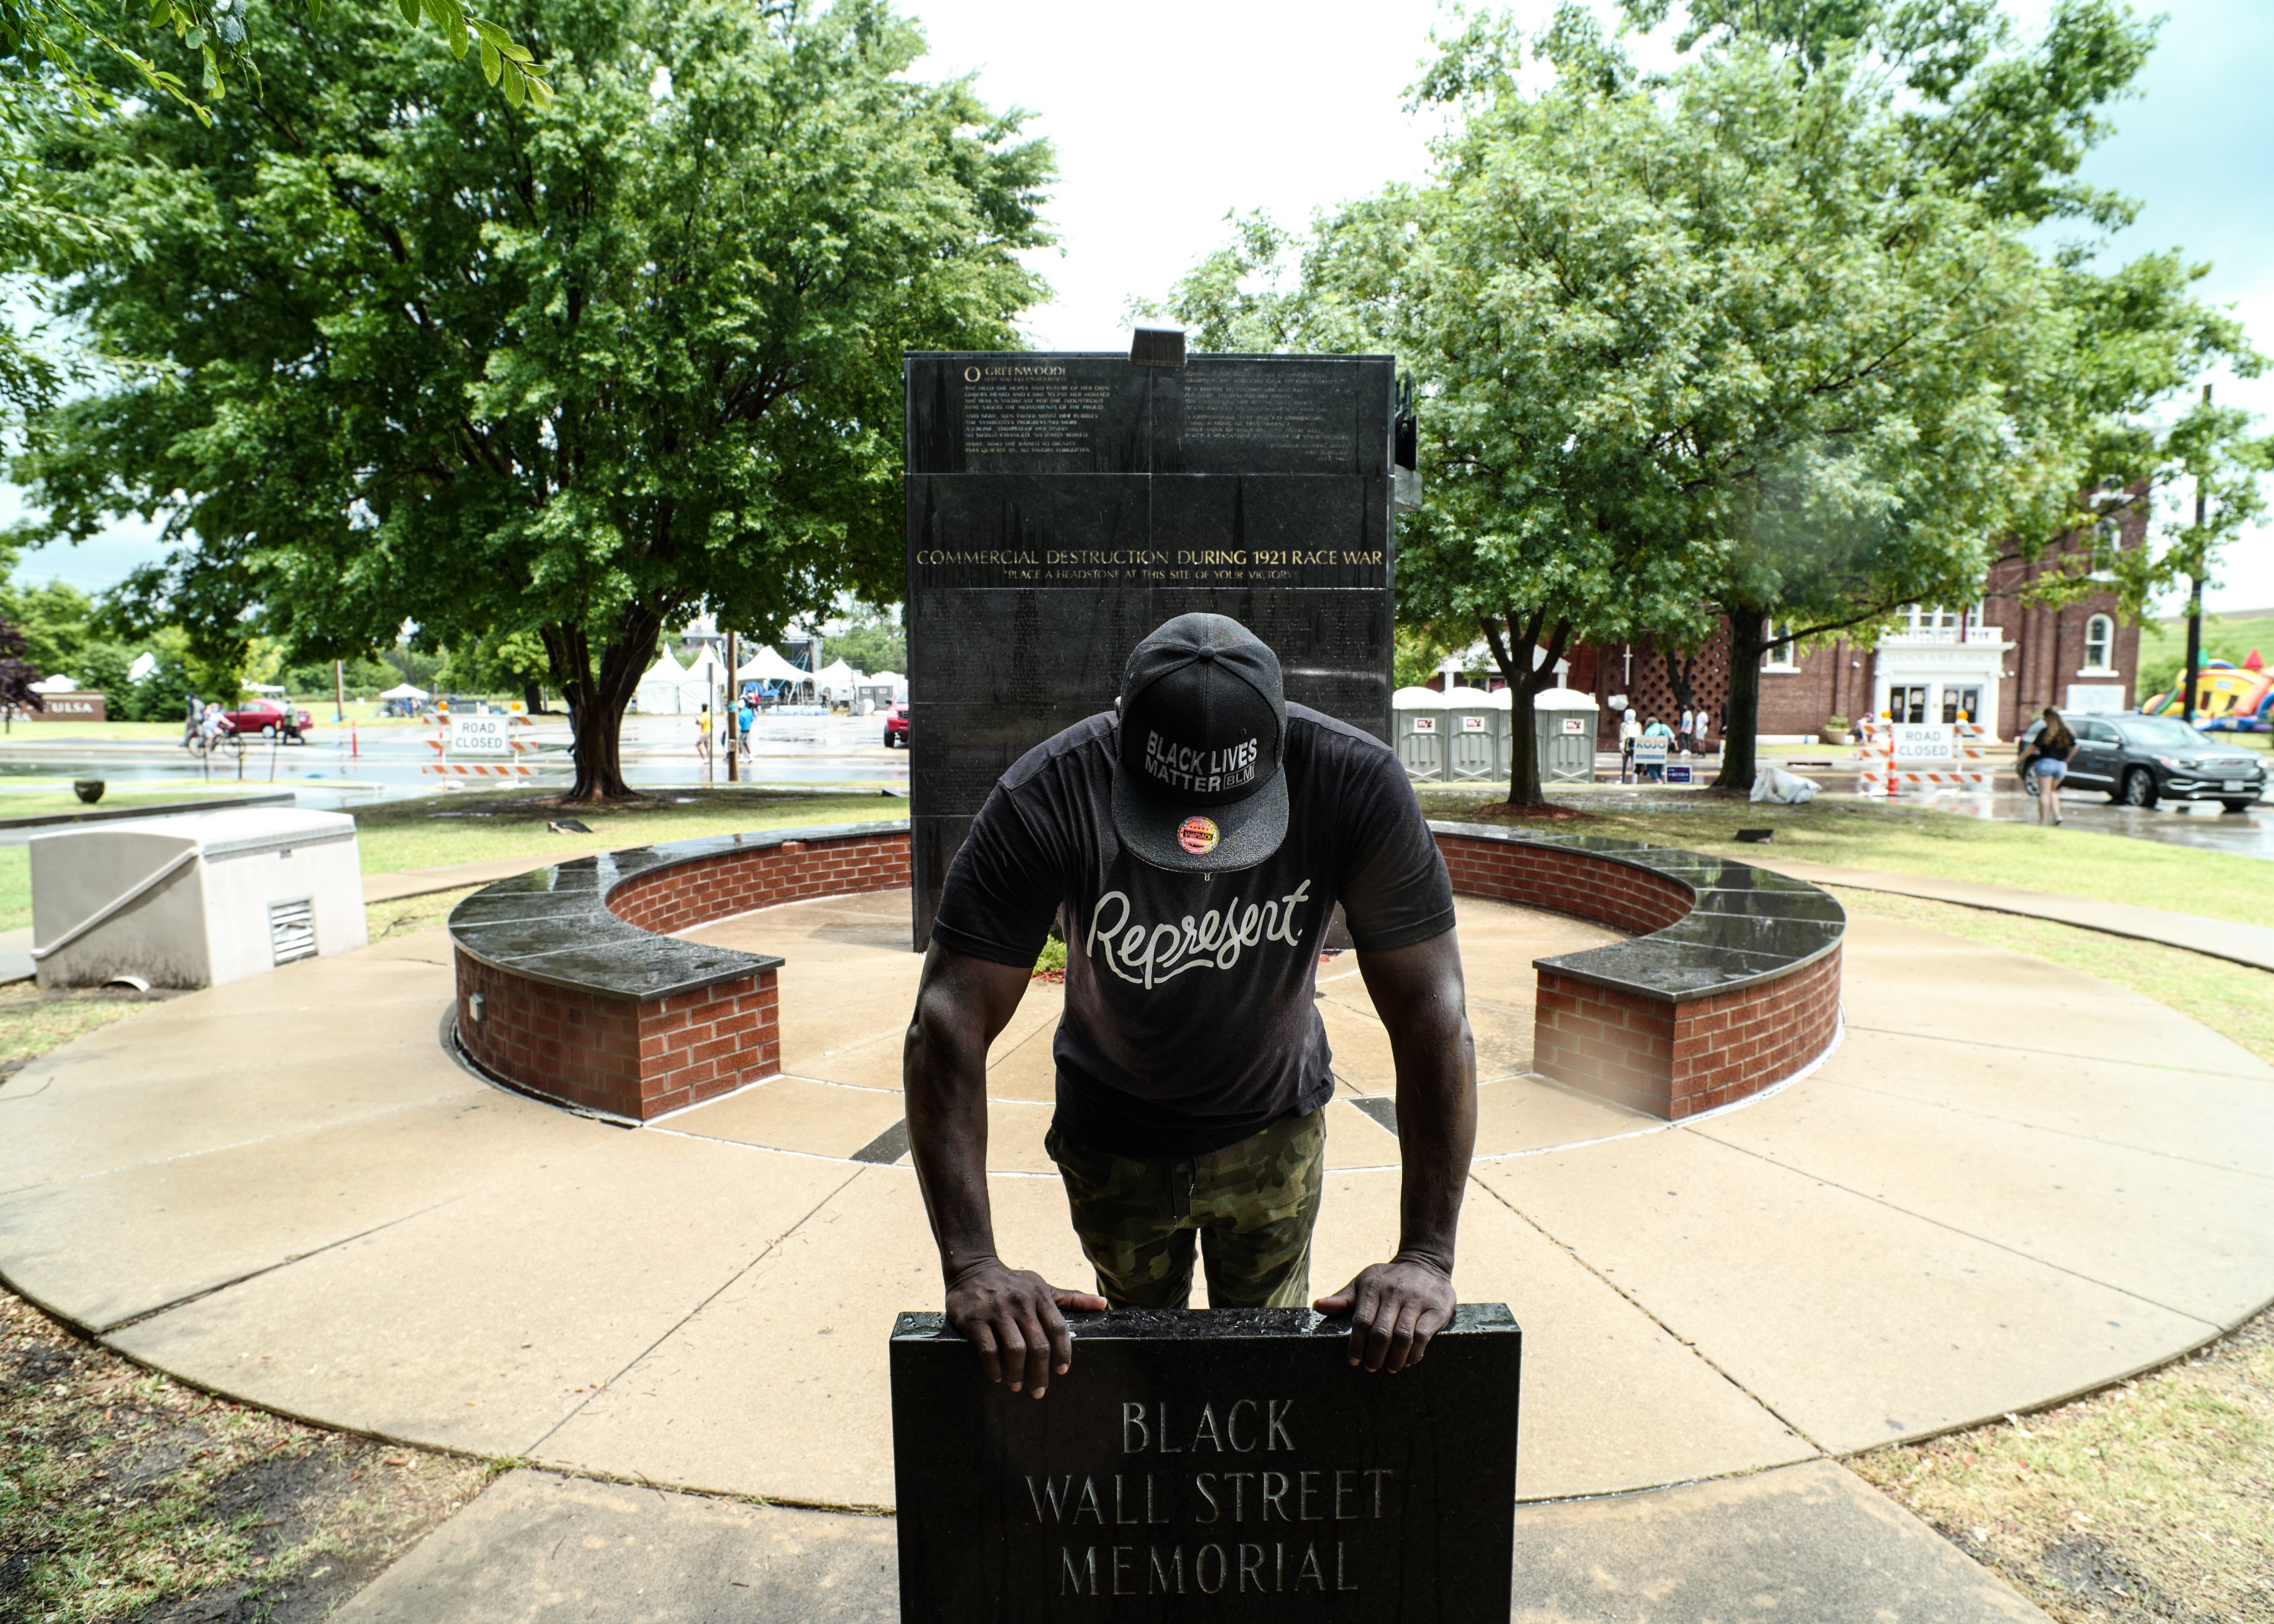 A memorial to Black Wall Street in Tulsa, Okla., on June 19, Juneteenth, a day before Trump’s rally (Ruddy Roye for TIME)